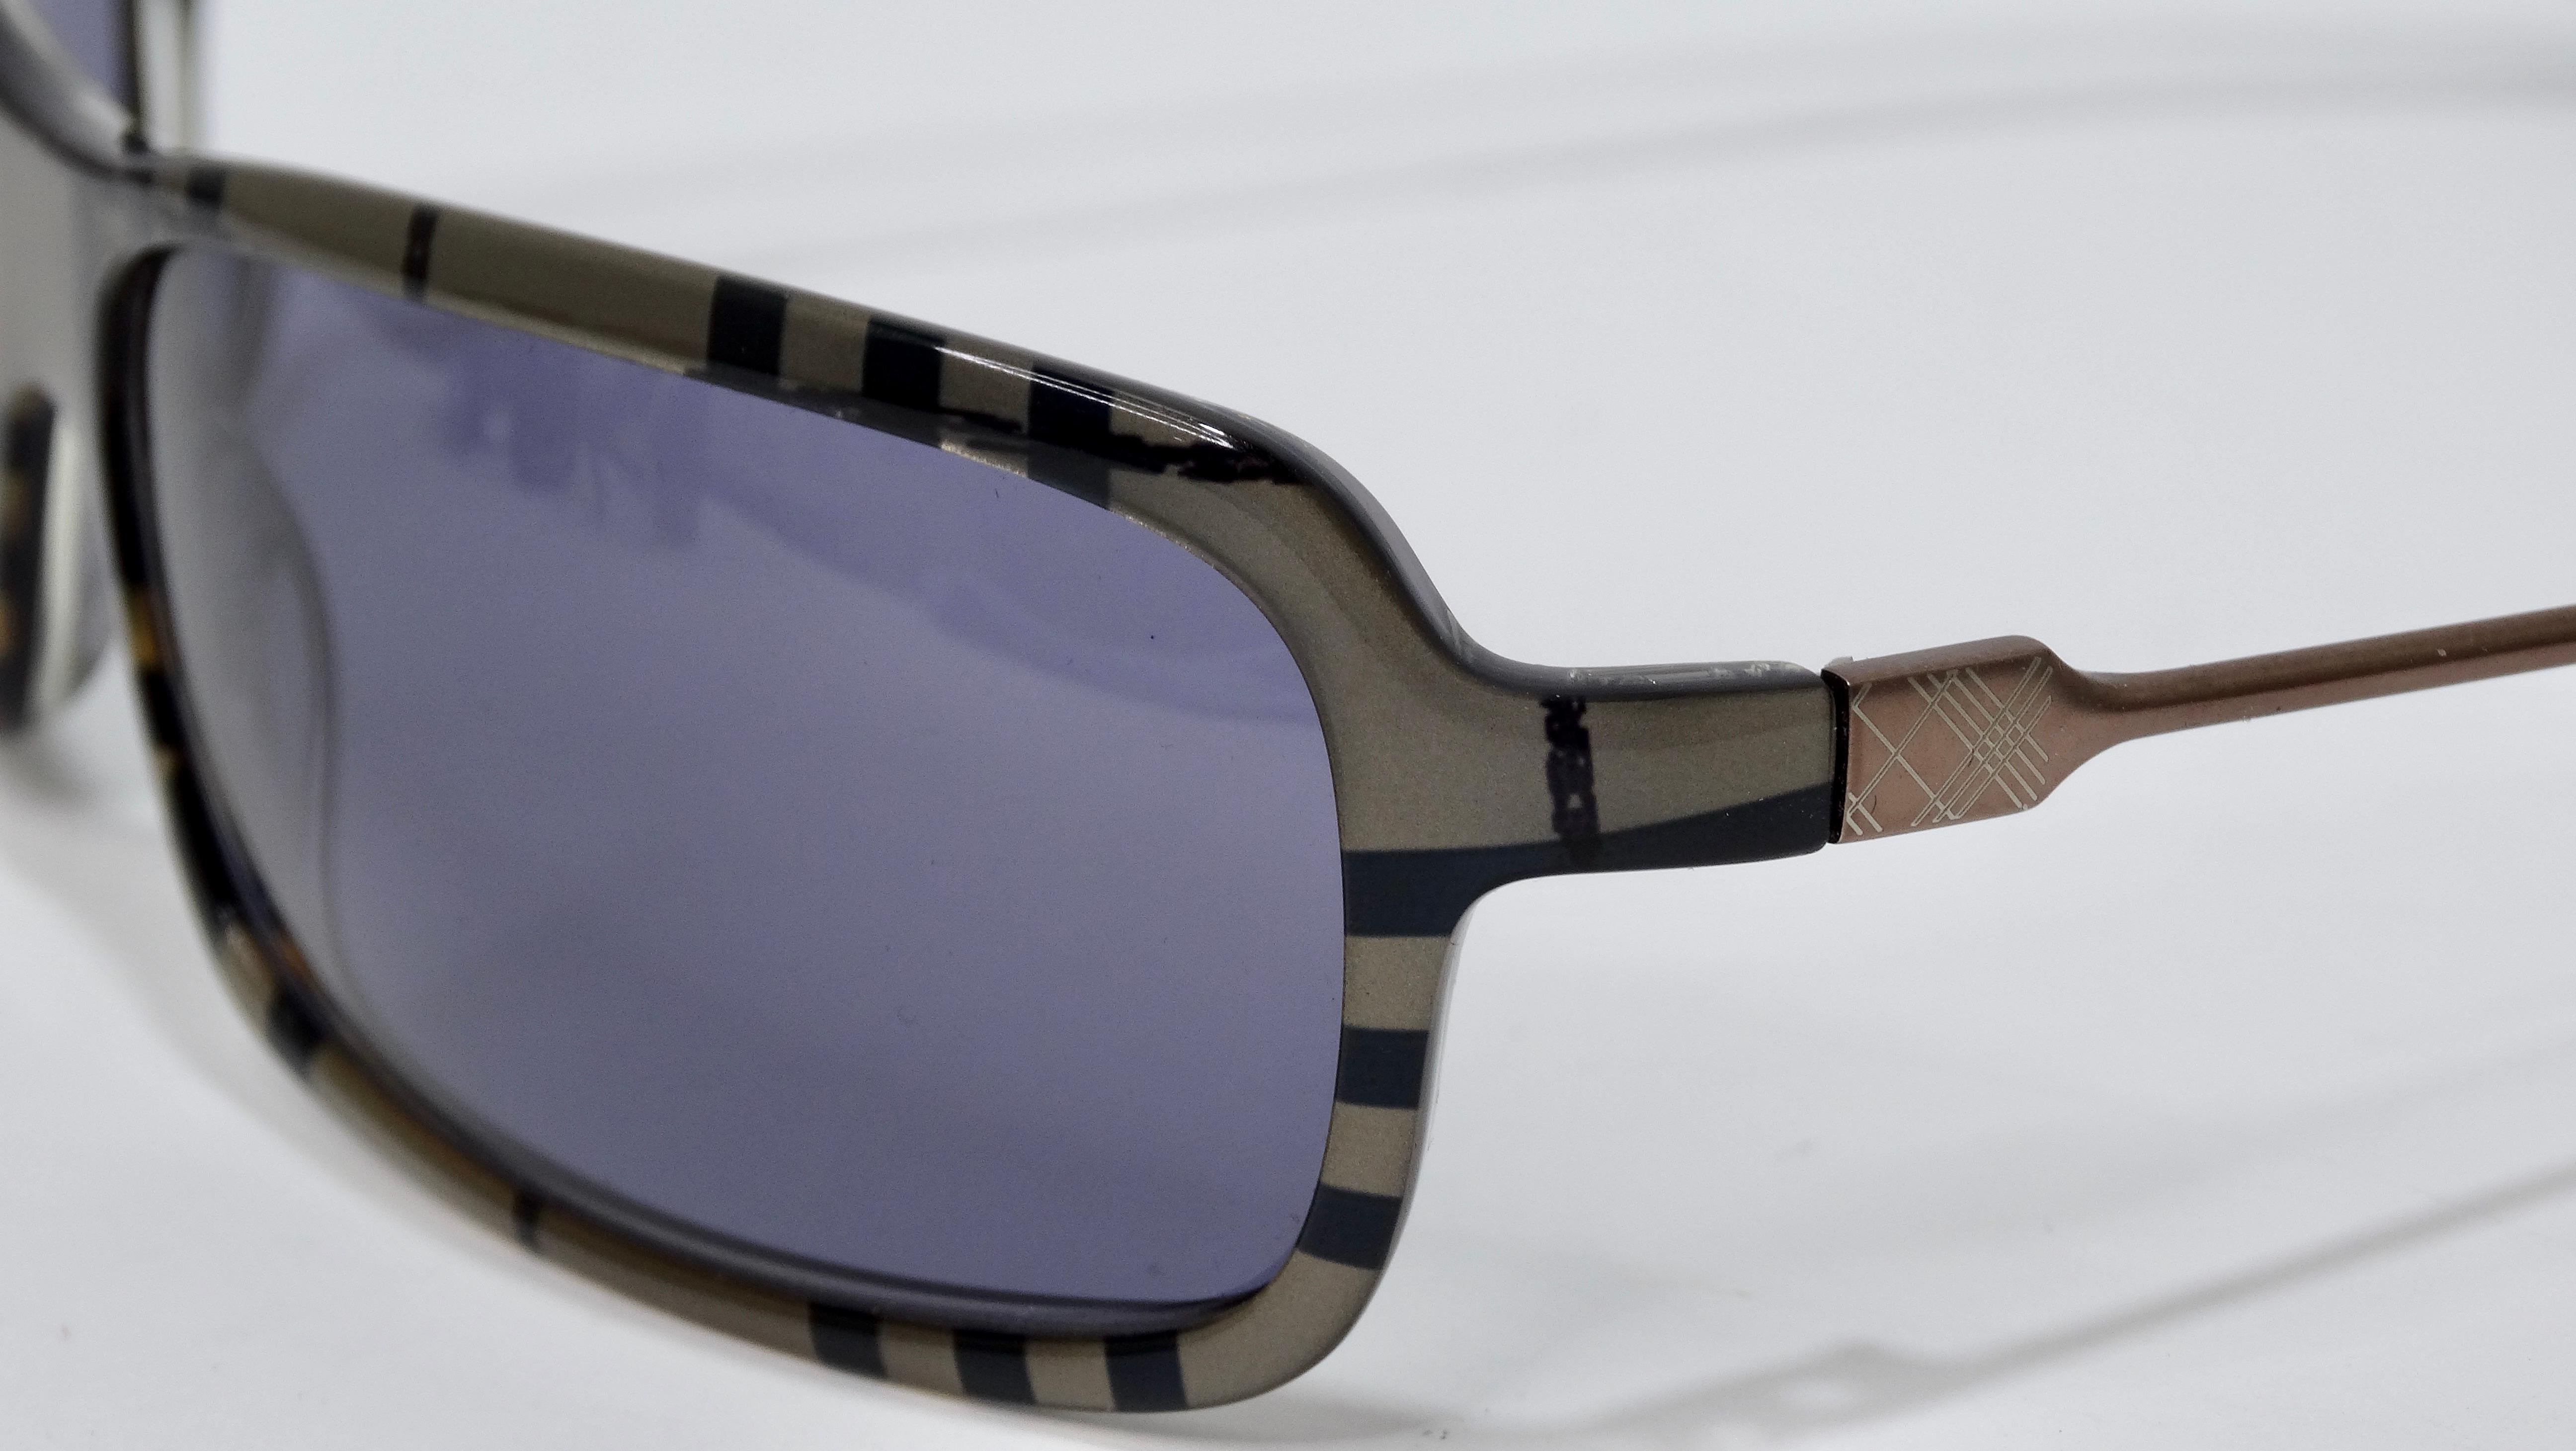 Burberry 1990's Rectangle Patterned Sunglasses In Excellent Condition For Sale In Scottsdale, AZ